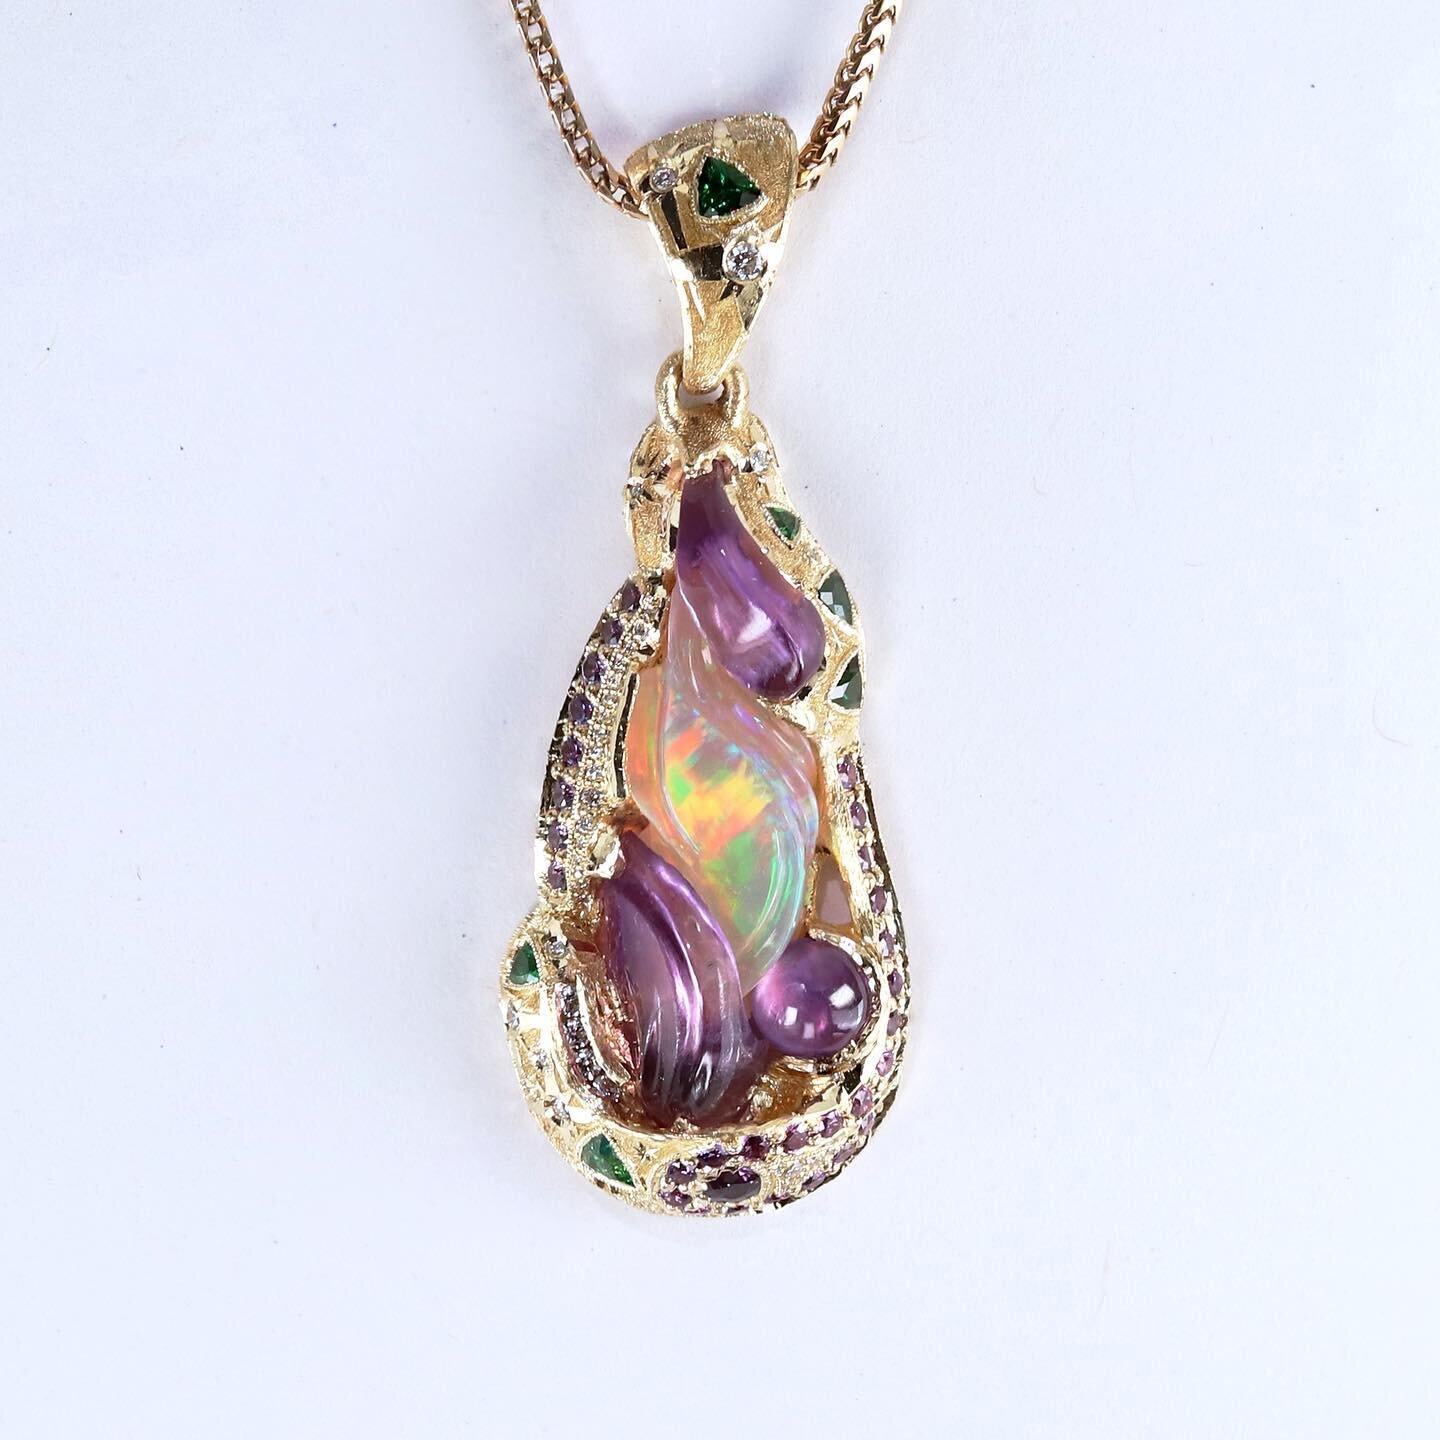 So happy to present this super special and gorgeous unicorn vibe inspired pendant! Cast in 18k gold, this whimsical piece features a 2.91ct opal, 3.07ct amethyst (all carved in house) along with 1.18ct of purple sapphire, .31 ct tsavorite, .13ct diam